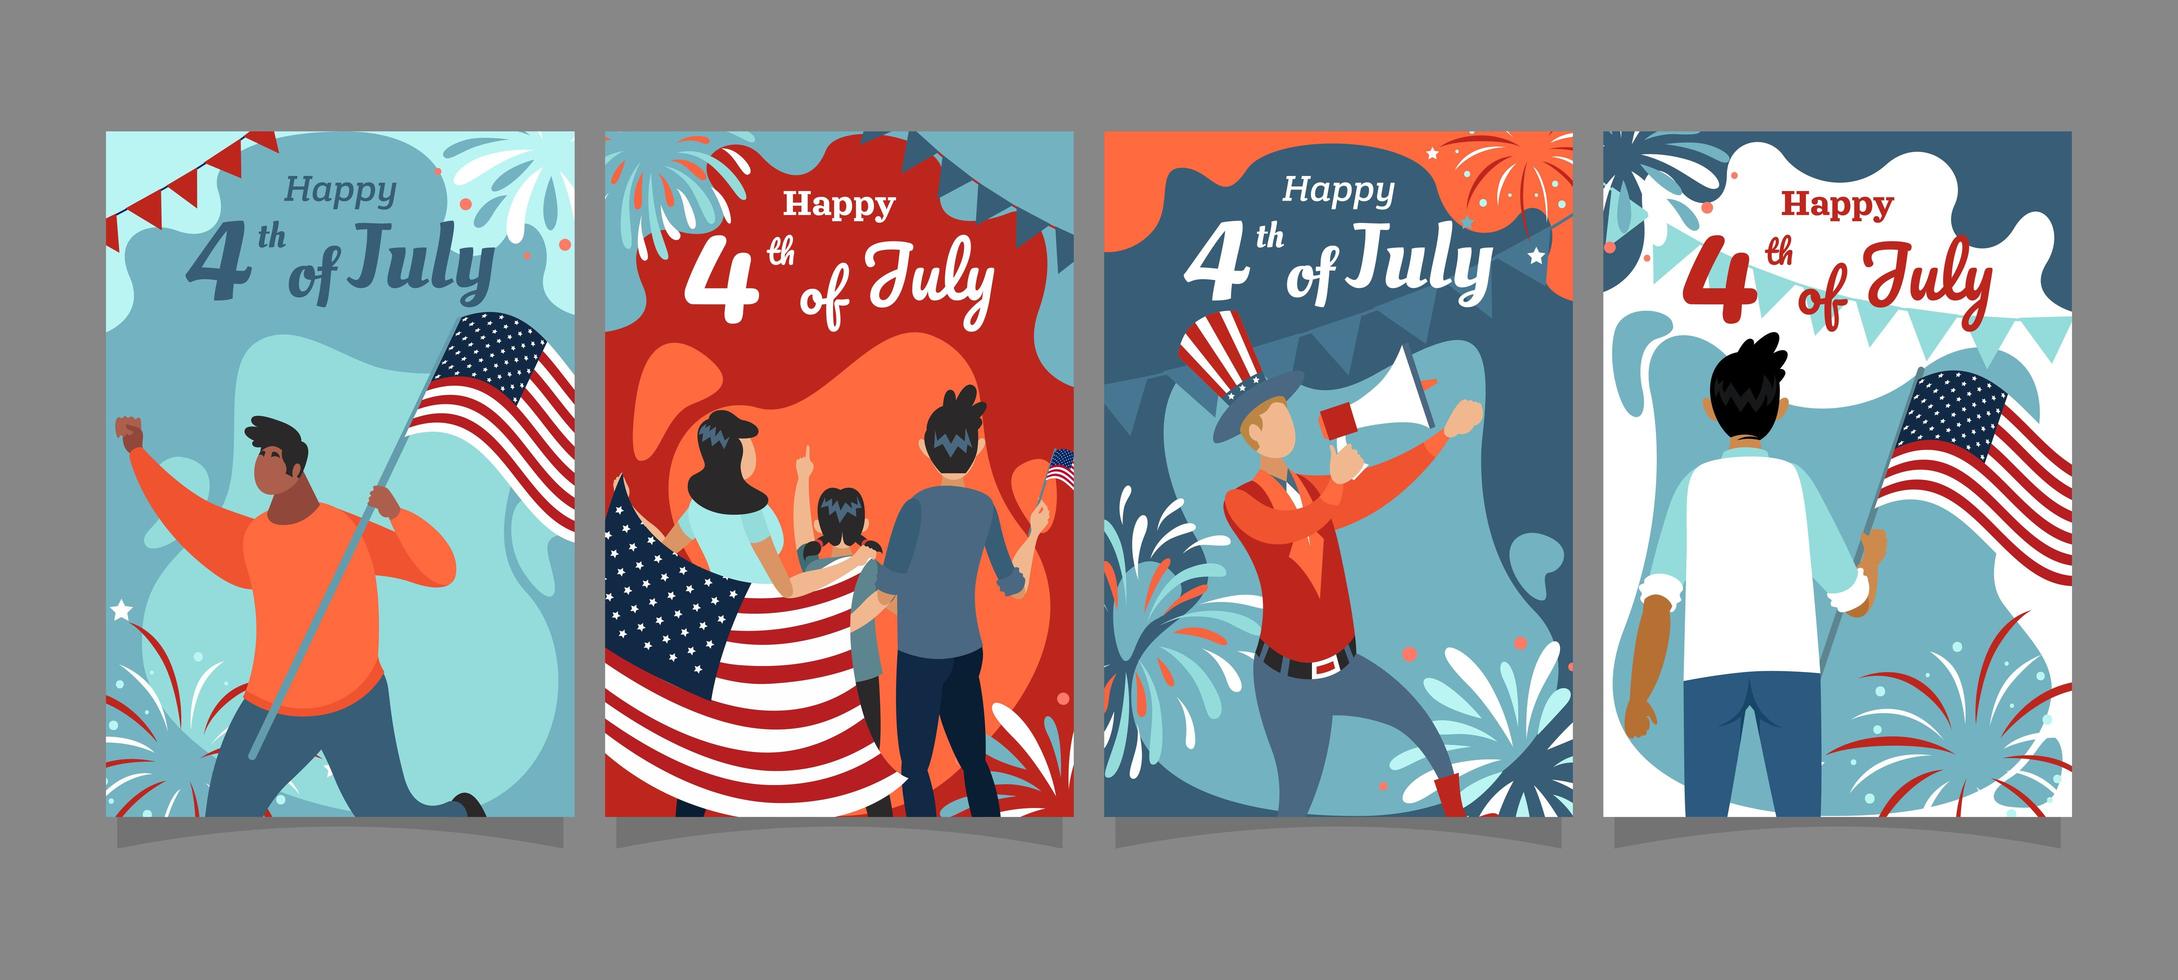 Fourth of July Festivity Cards Concept vector